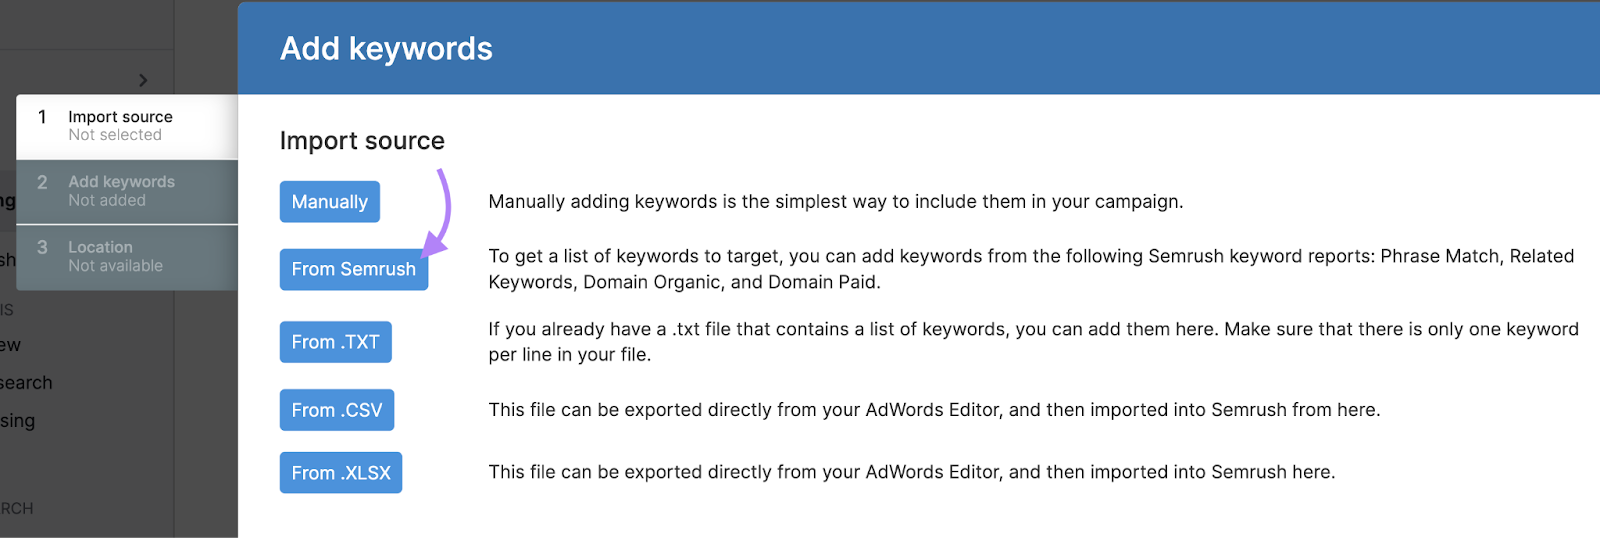 The "From Semrush" button in the "Add keywords" stage of the PPC Keyword Tool's setup wizard